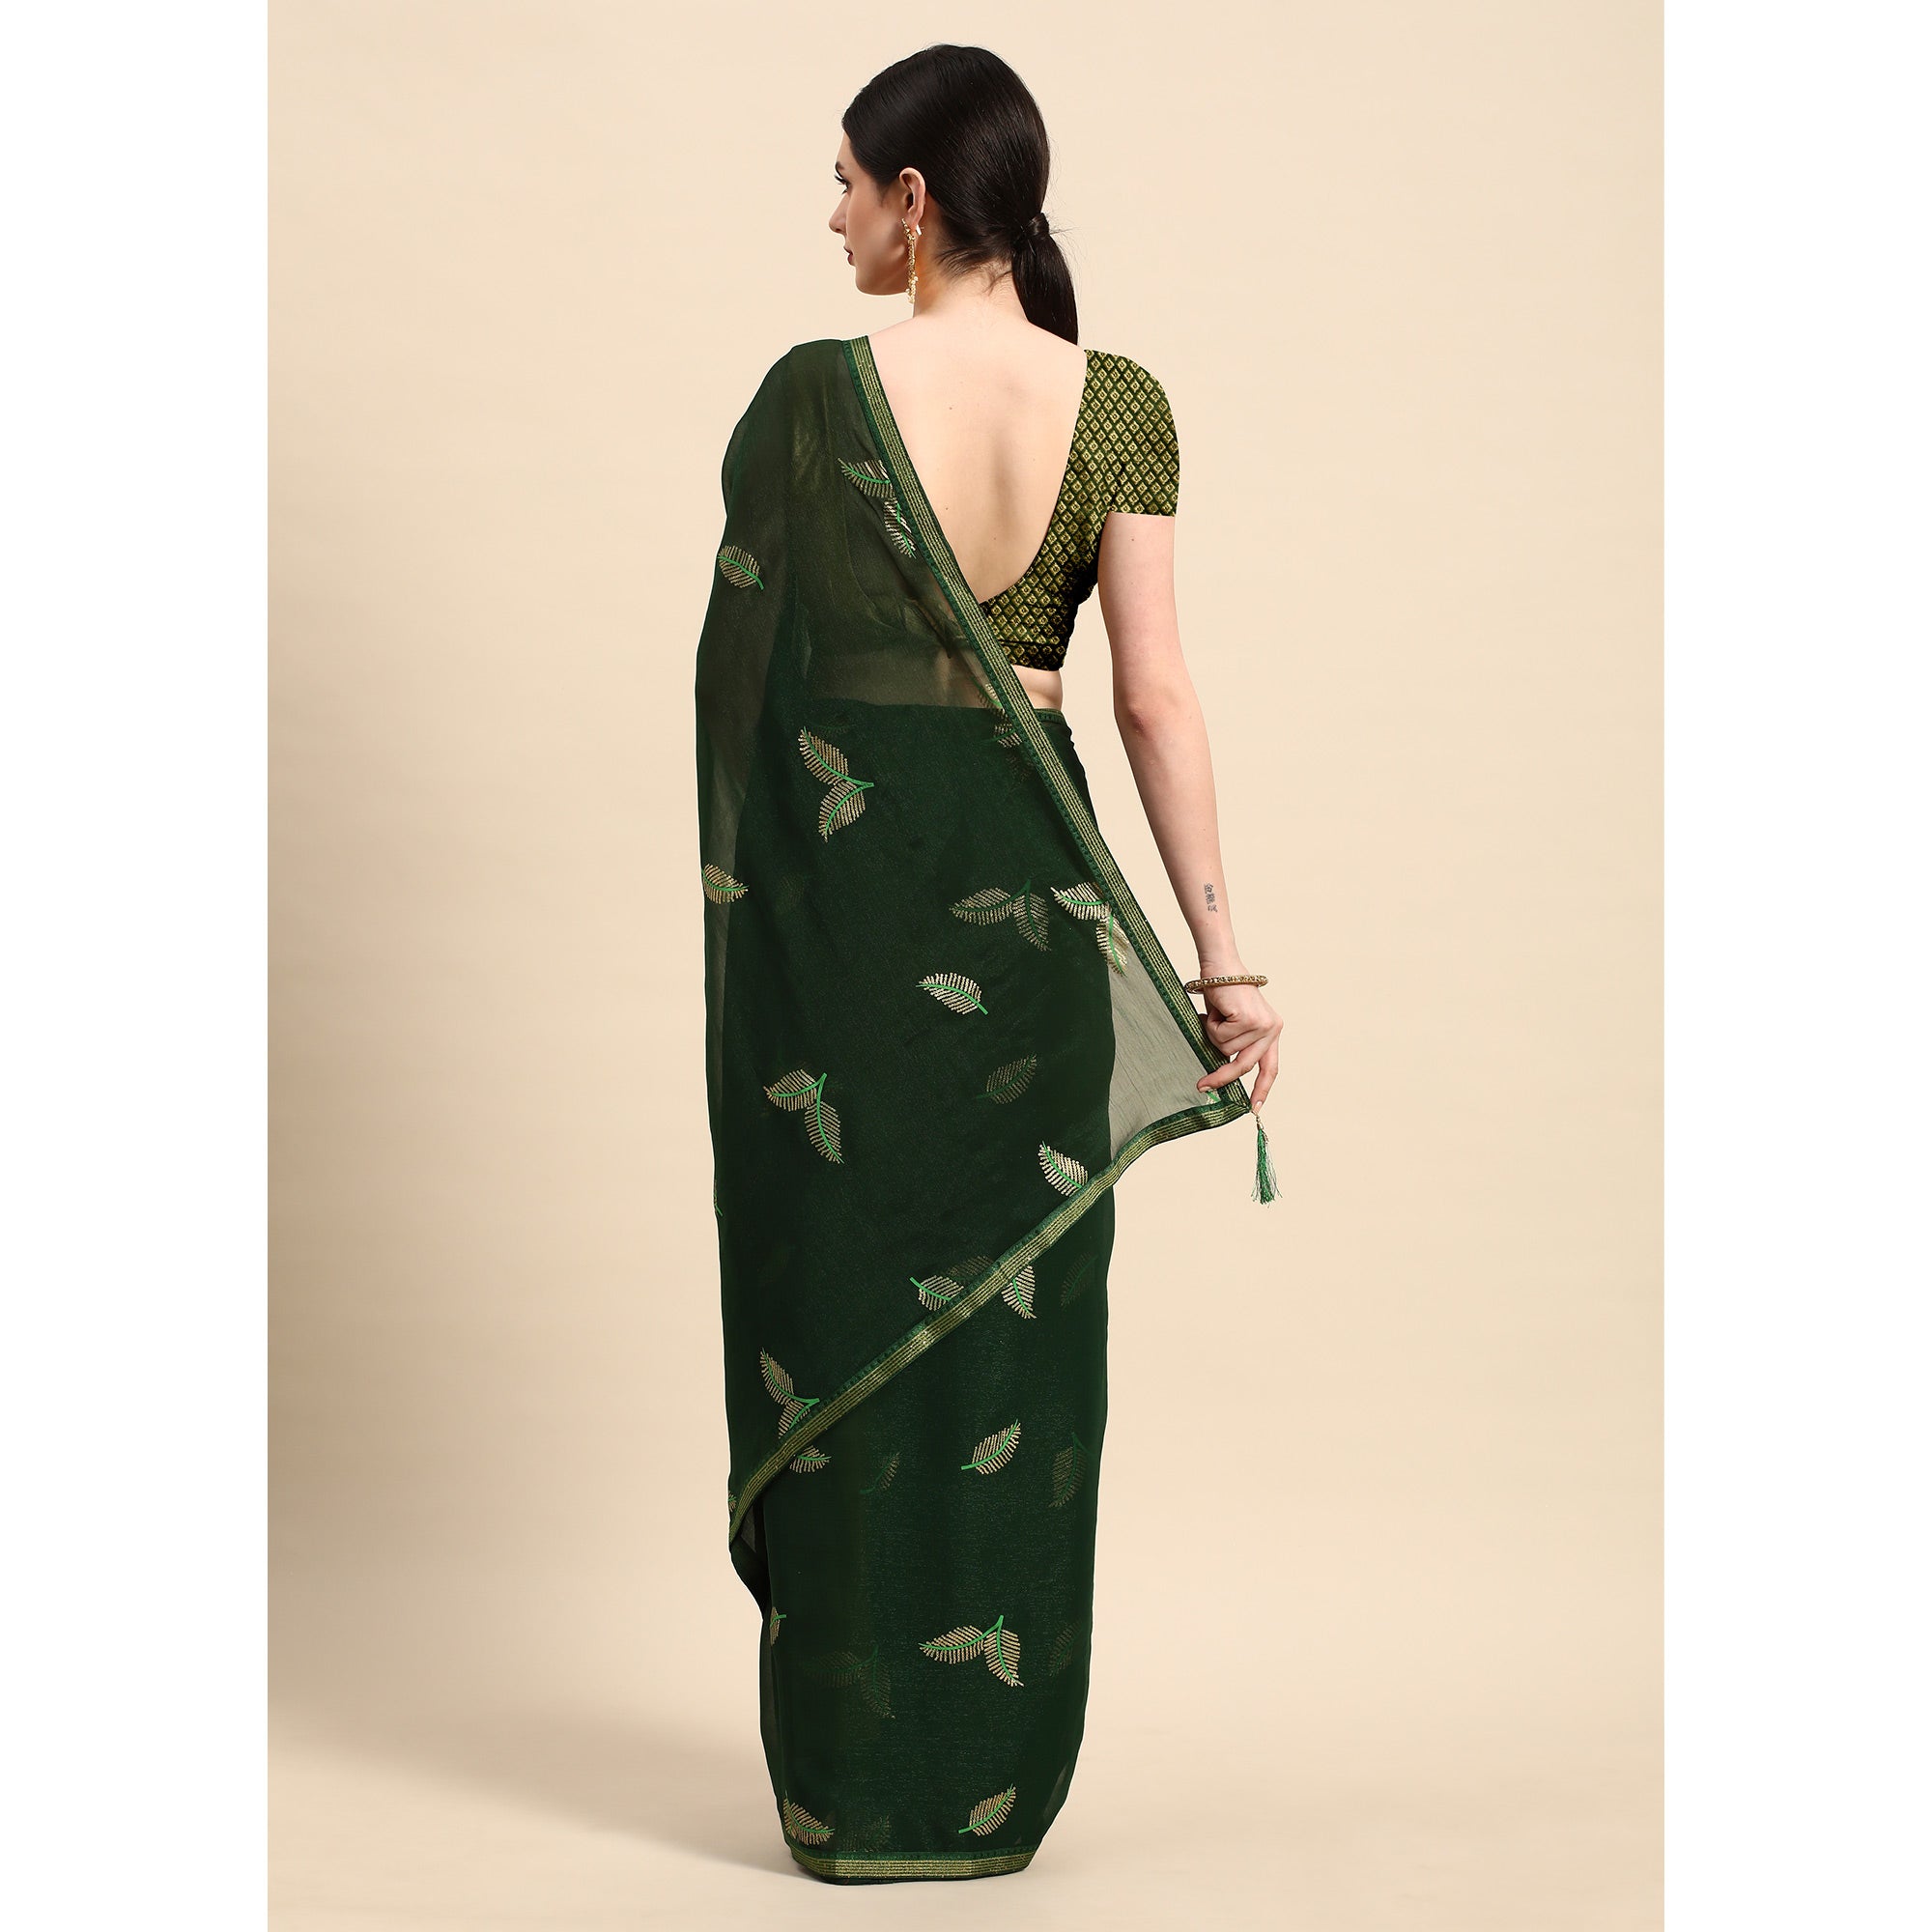 Green Sequins Embroidered Chiffon Saree With Tassels